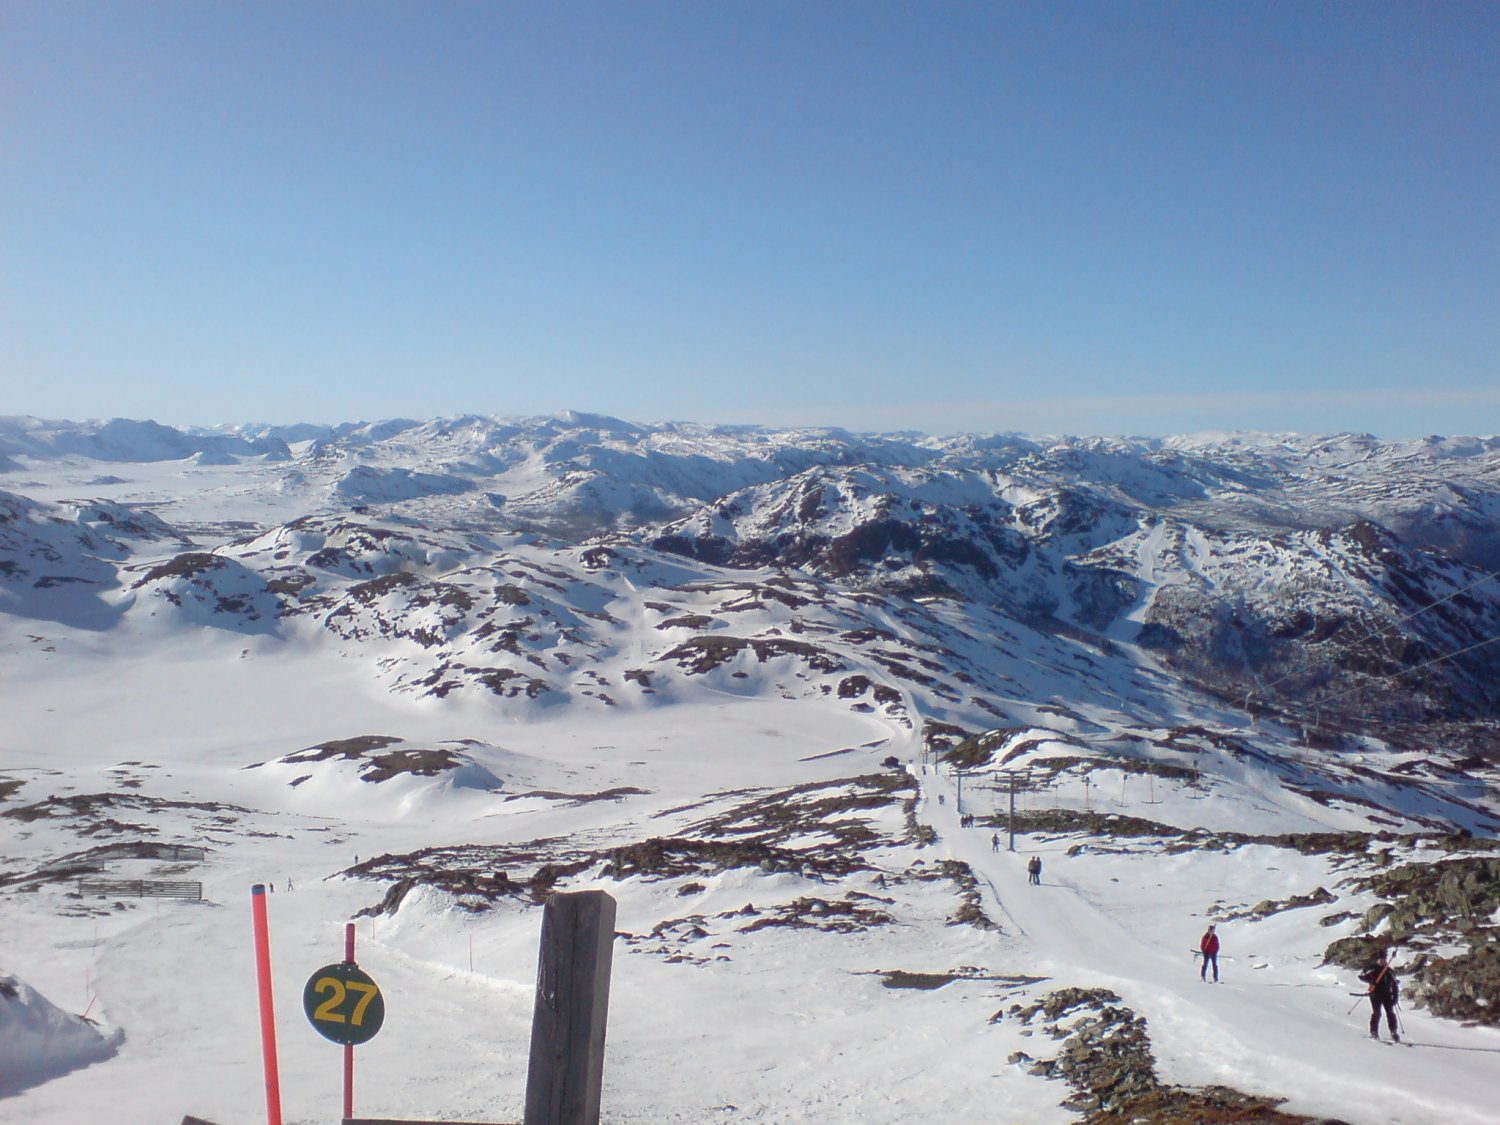 View from the highest lift in Hemsedal